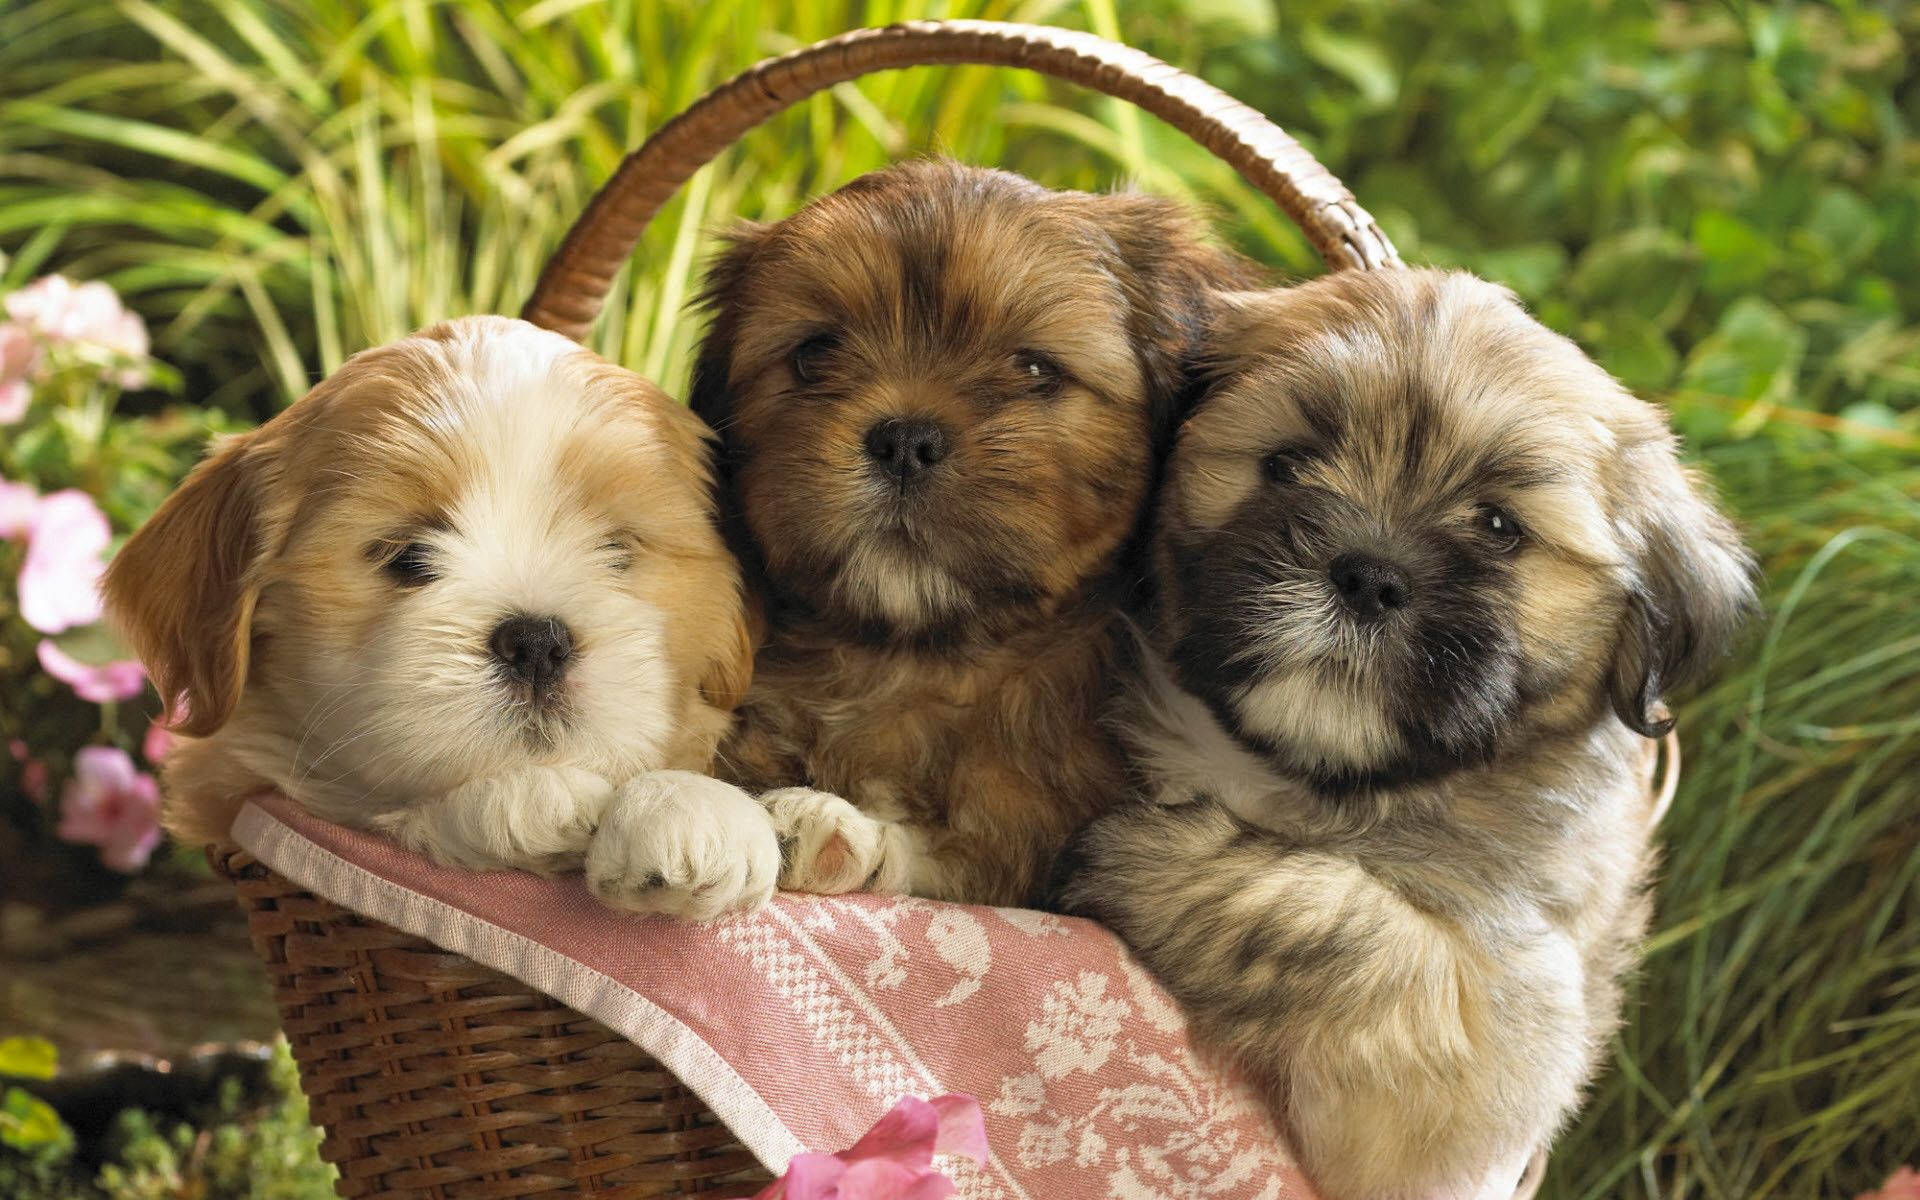 Three Adorable Shih Tzu Puppies Relaxing Together Wallpaper